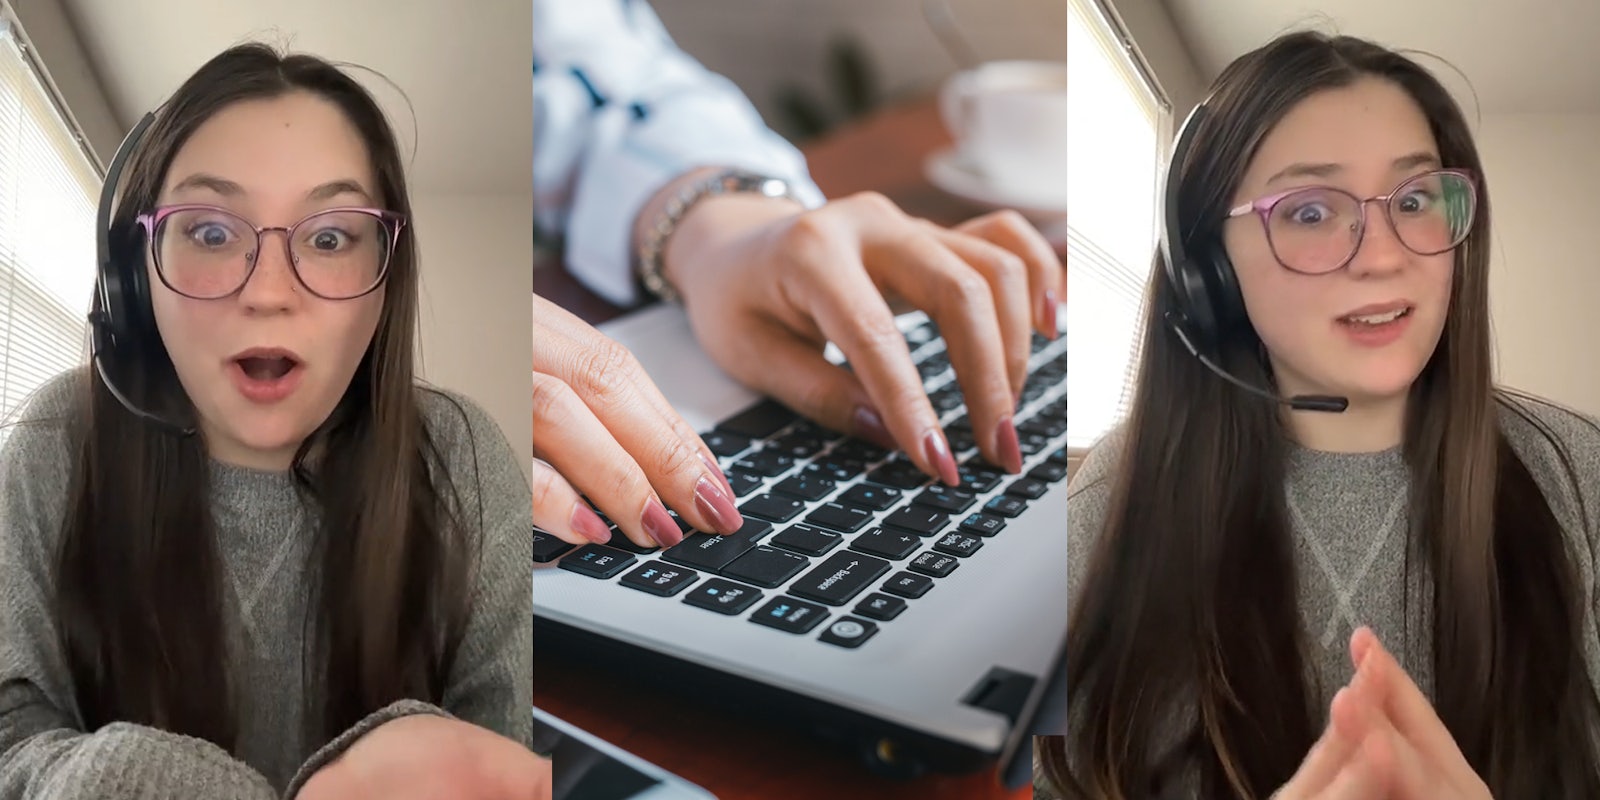 worker speaking with headset on (l) hands typing on laptop keyboard (c) worker speaking with headset on (r)